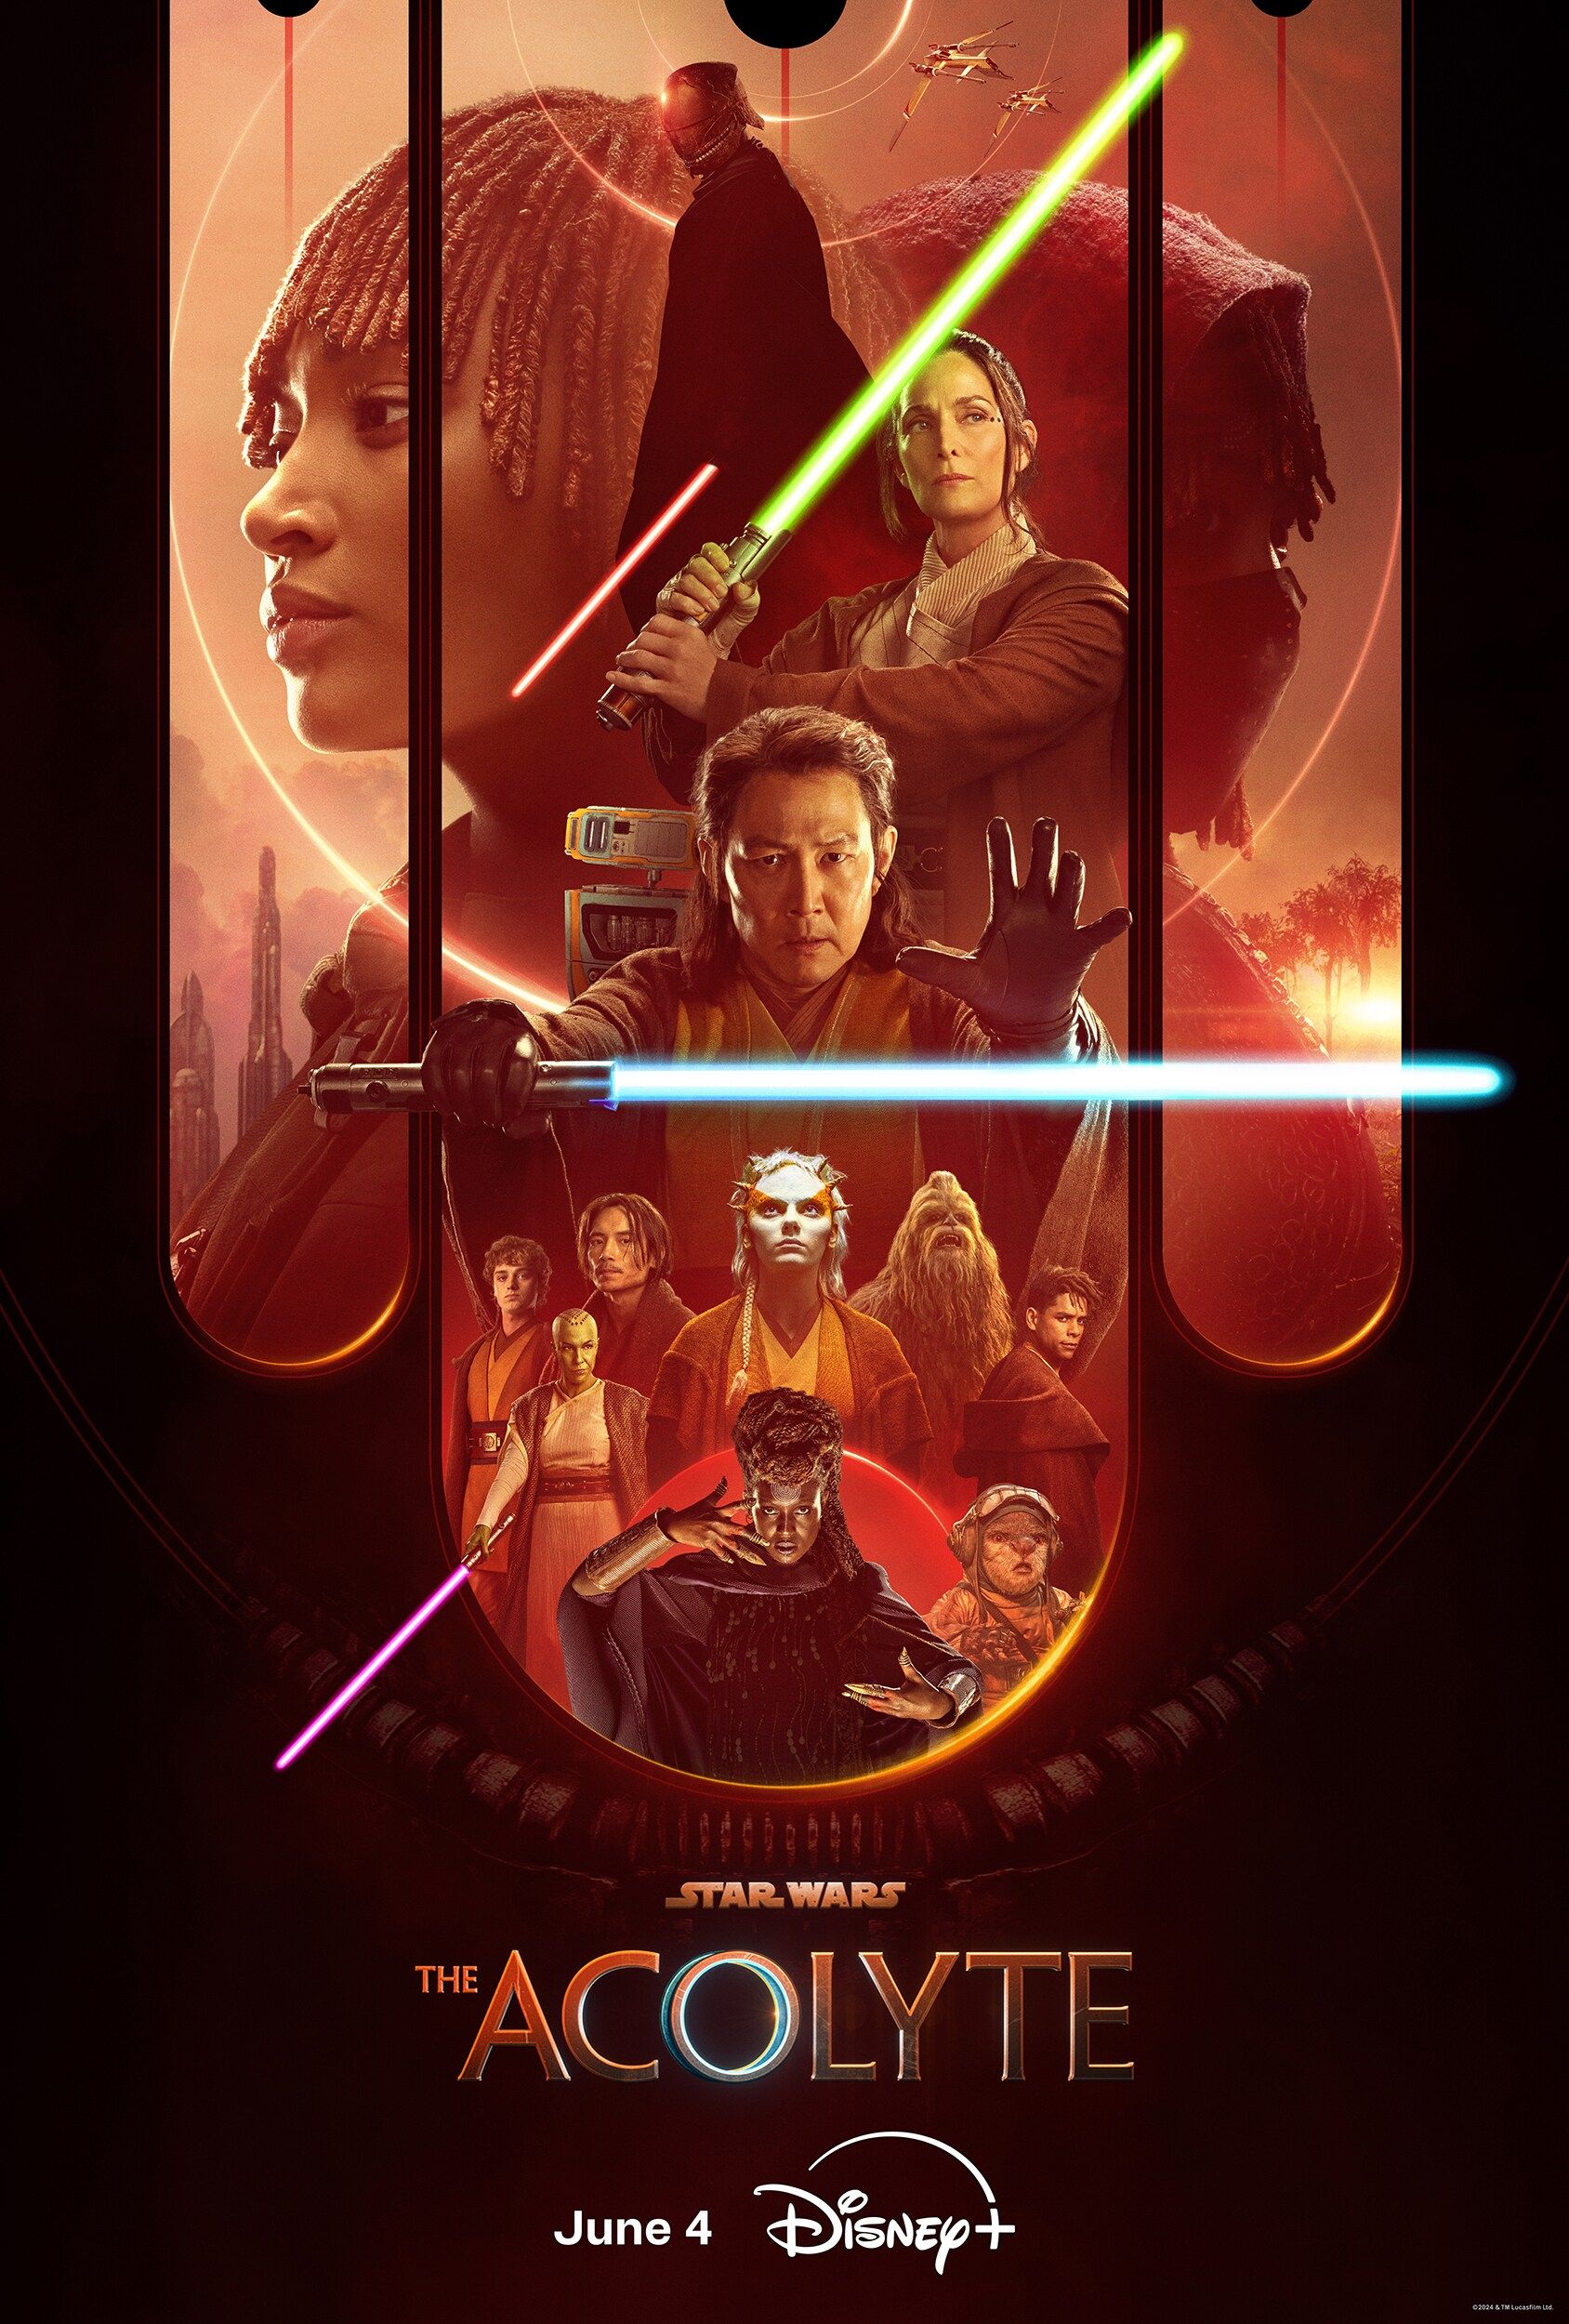 The Acolyte Poster Showing Jedi Order, Mae, and a Sith Lord Holding Lightsabers